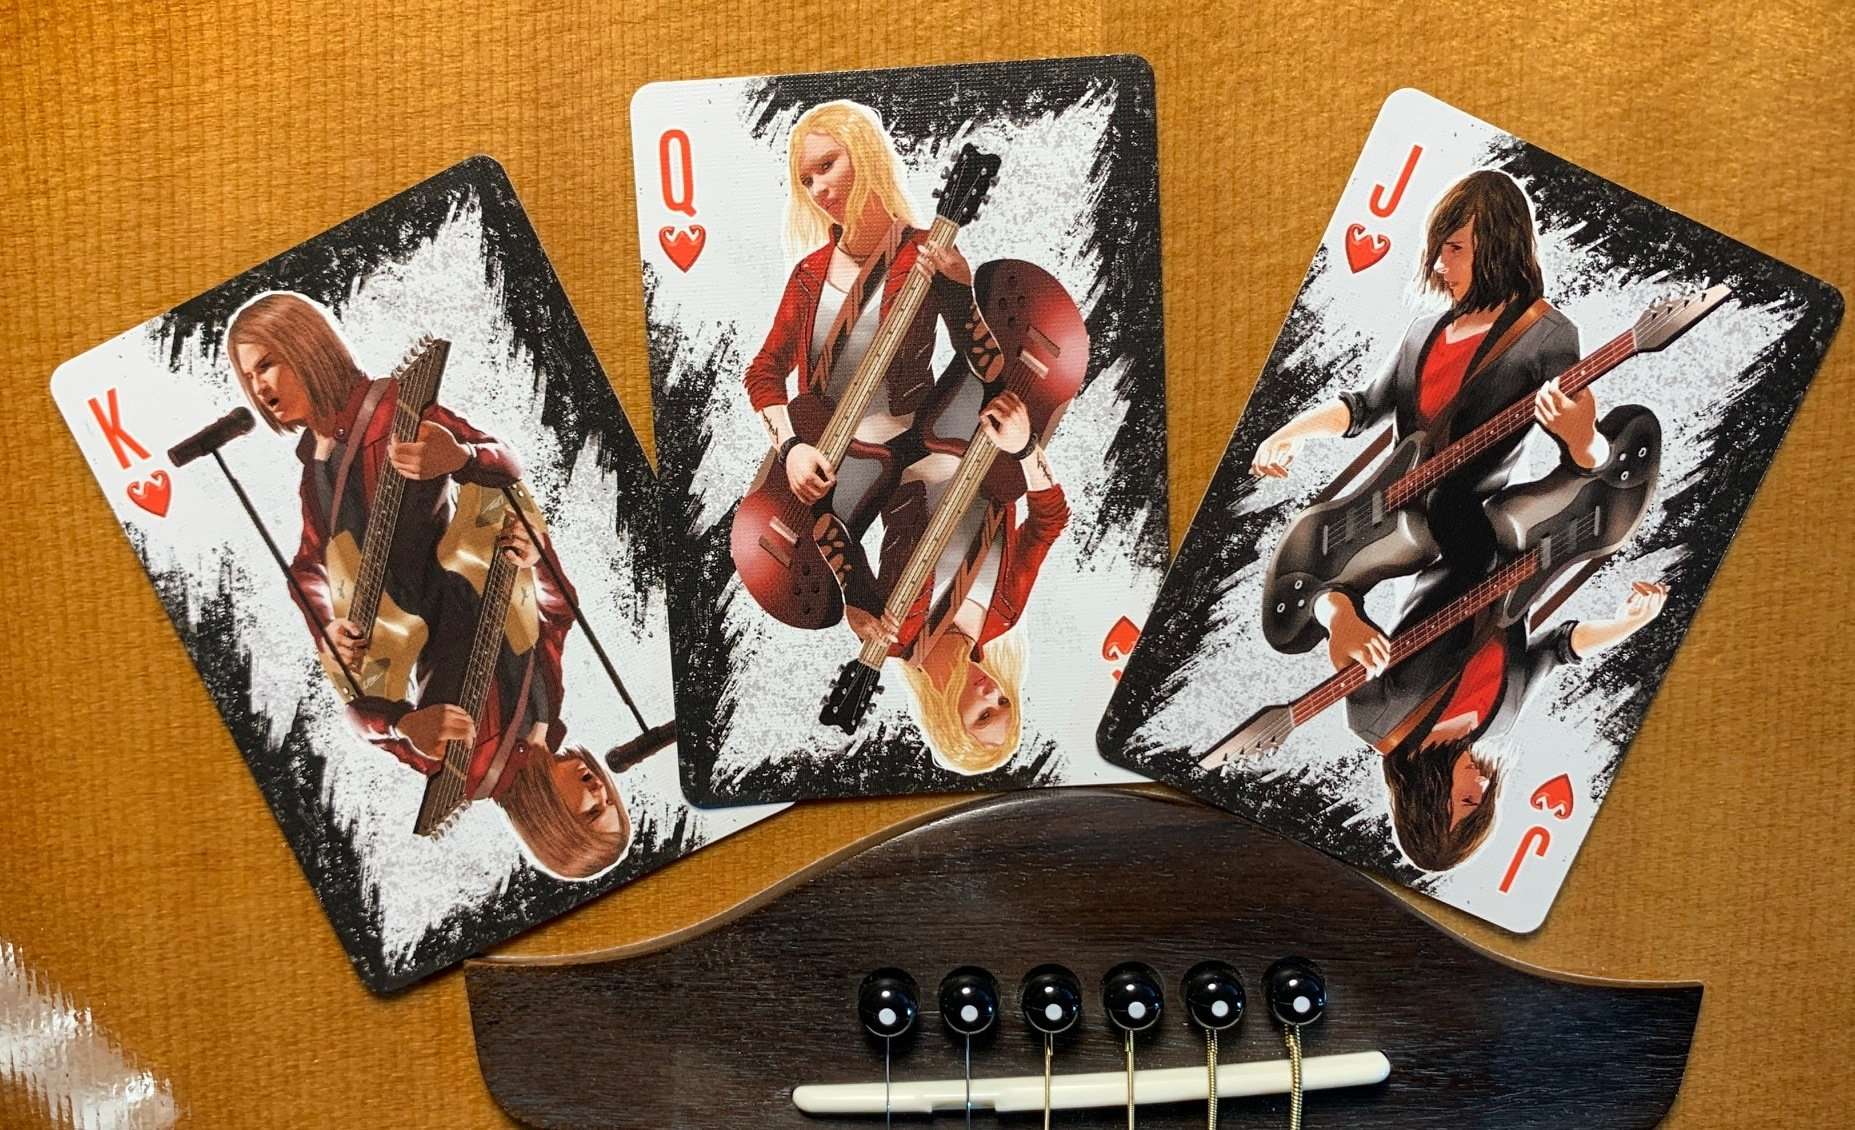 PlayingCardDecks.com-Rock & Roll Bicycle Playing Cards